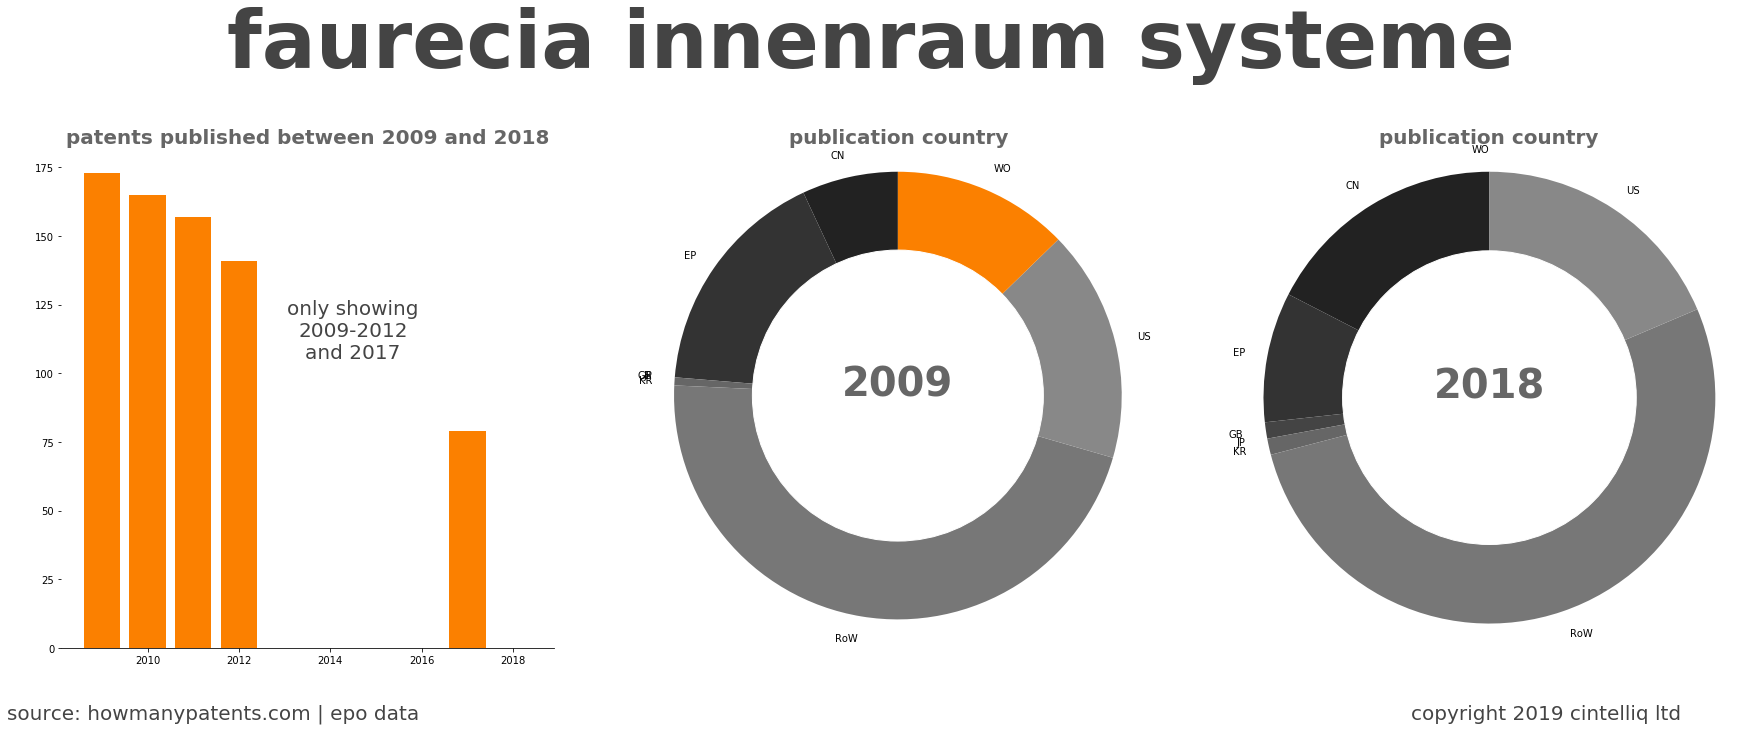 summary of patents for Faurecia Innenraum Systeme